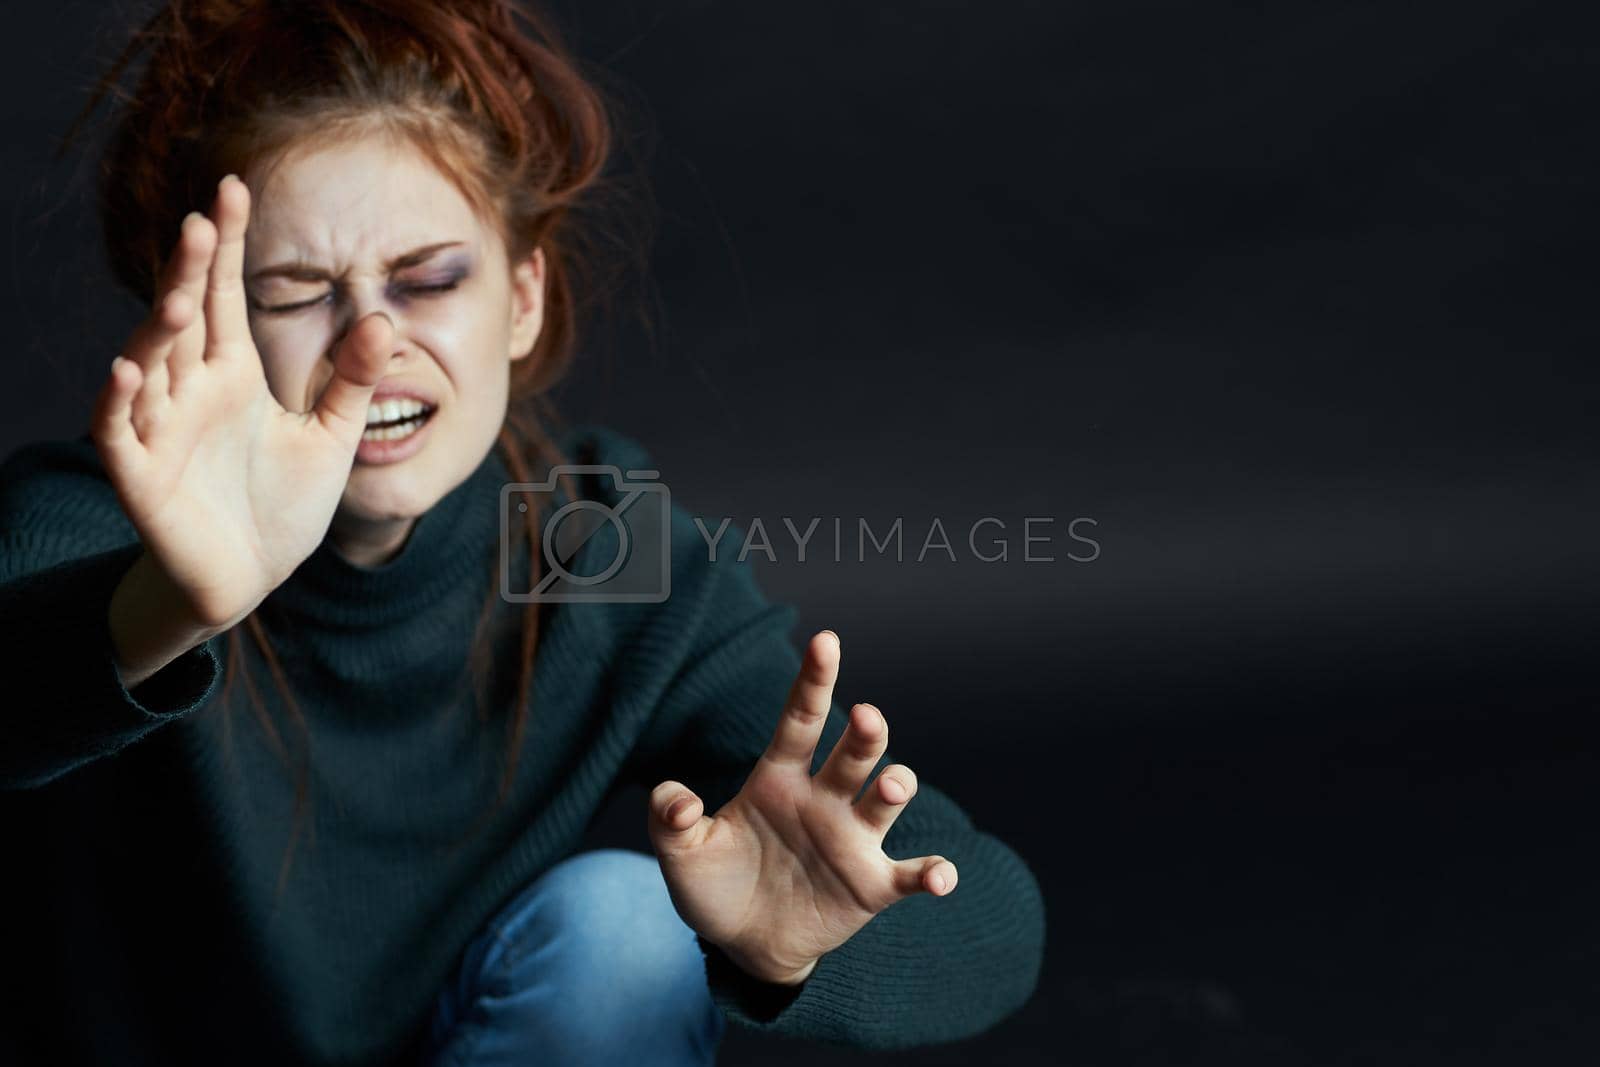 Royalty free image of emotional woman depression disorder pain beating aggression by Vichizh